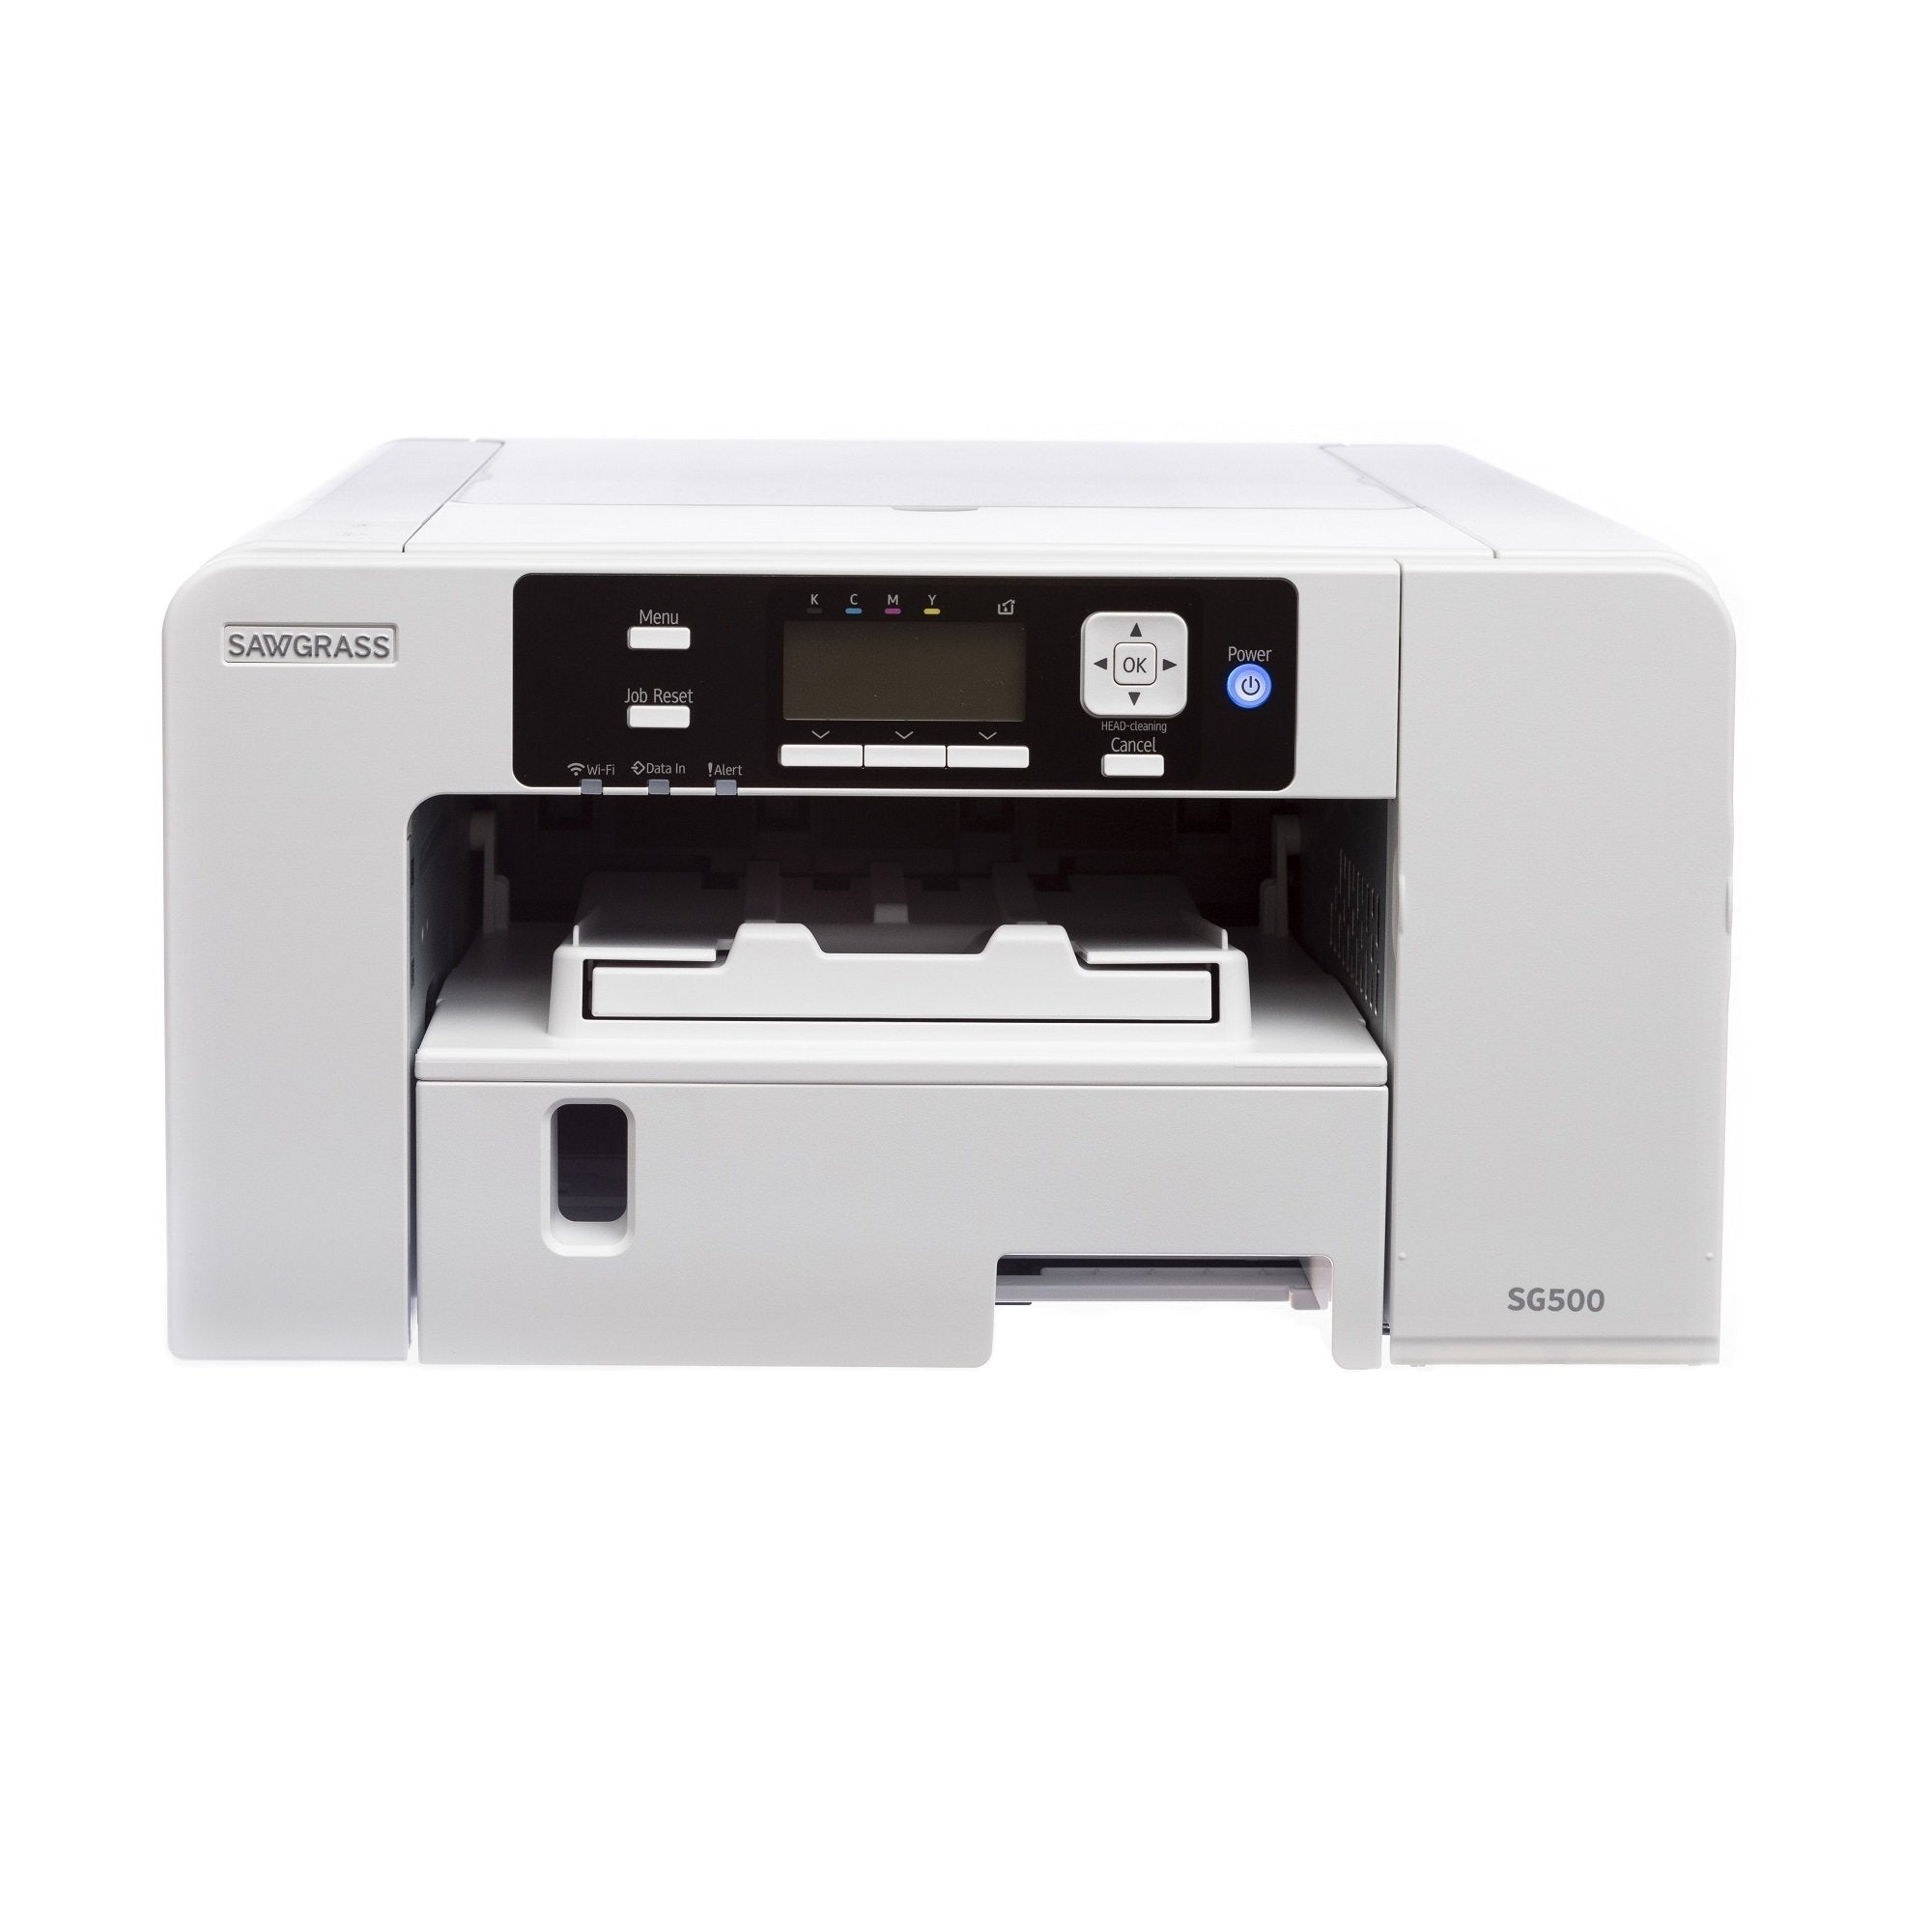 Sawgrass UHD SG500 Sublimation Printer Starter Bundle with EasySubli Ink Set, Sublimation Paper, Tape, Blanks, Designs and Access to Exclusive